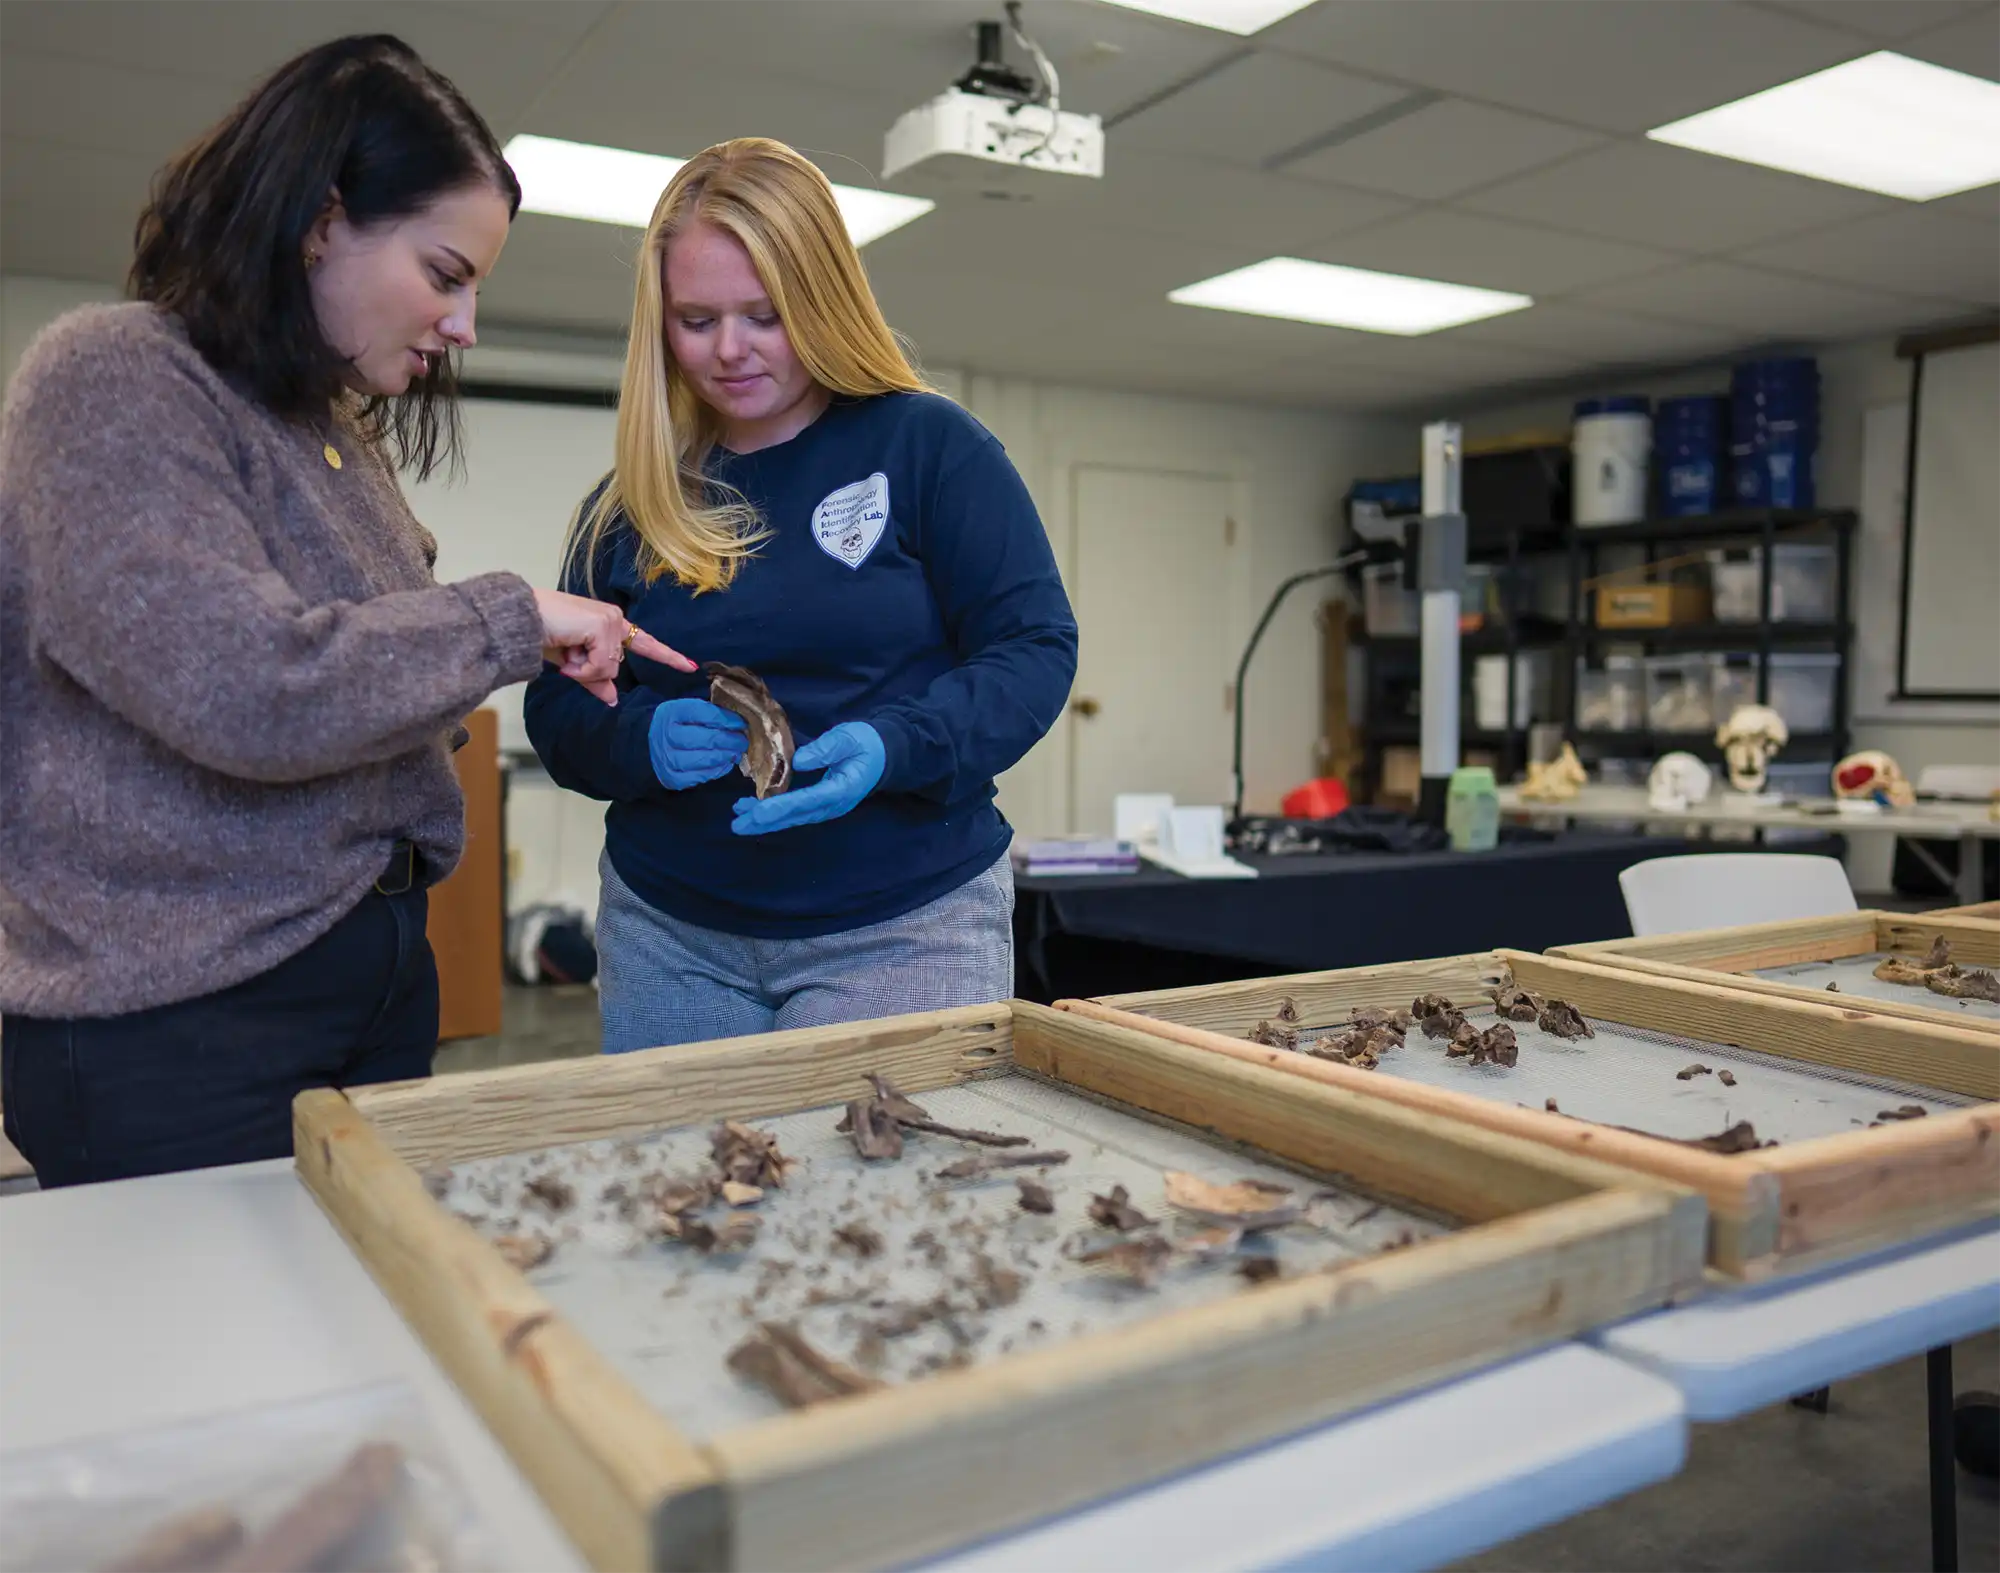 Amy Michael, left, talks with Kylee Jedraszek ’23, while Kylee works with remains discovered that are likely part of a burial area on a poor farm, common in New England in the 1800s and early 1900s. 